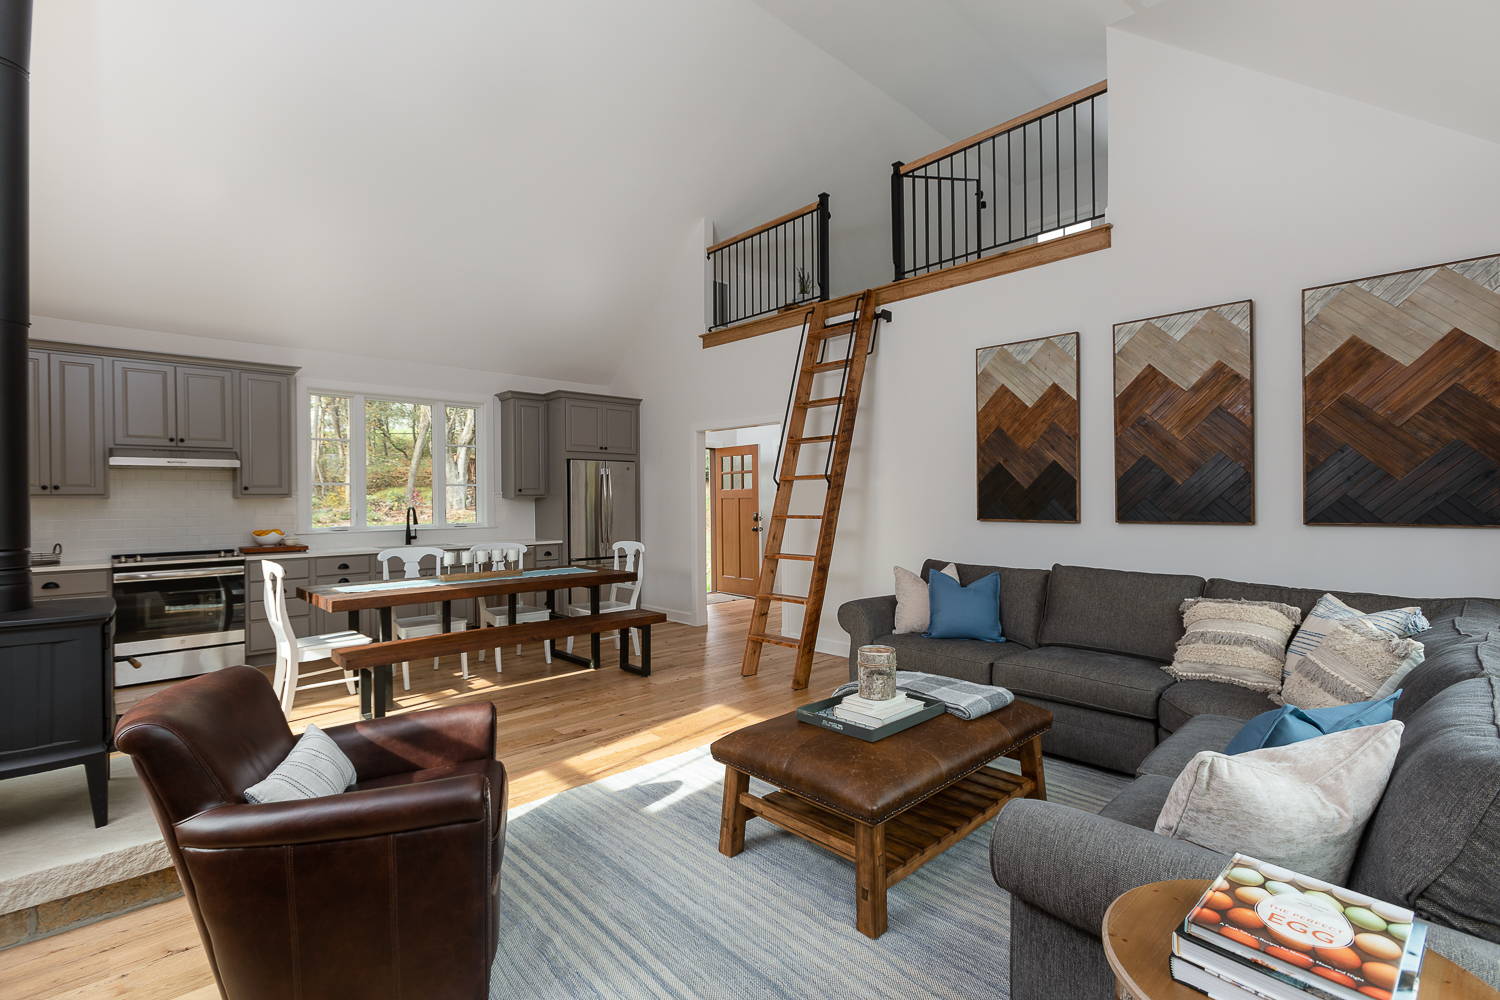 Multigenerational Living, alair homes hunt country to custom home builder in loudoun county